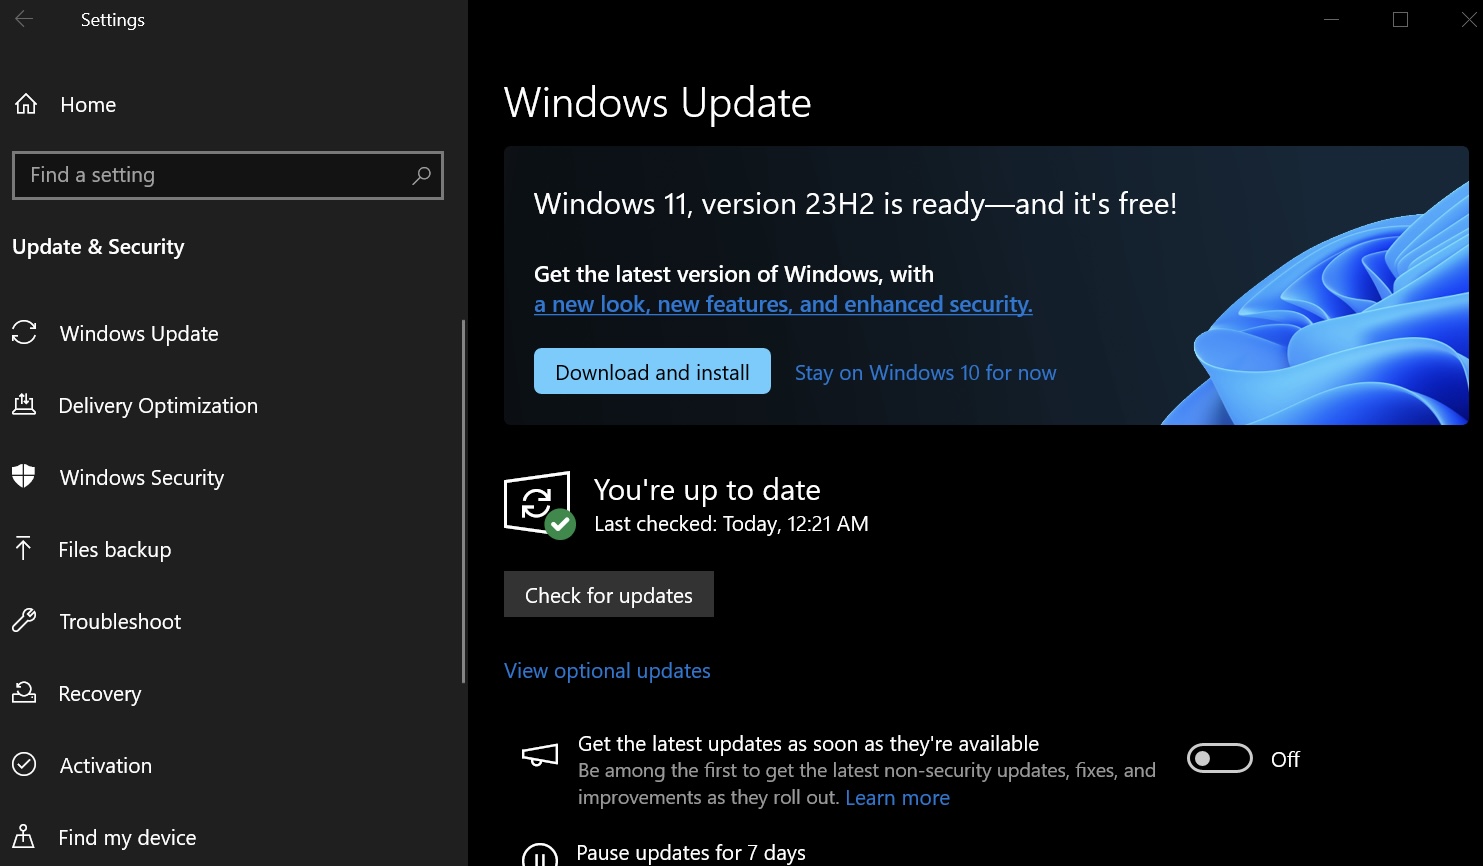 Windows 10 finally offers a direct upgrade to Windows 11 23H2 for more users